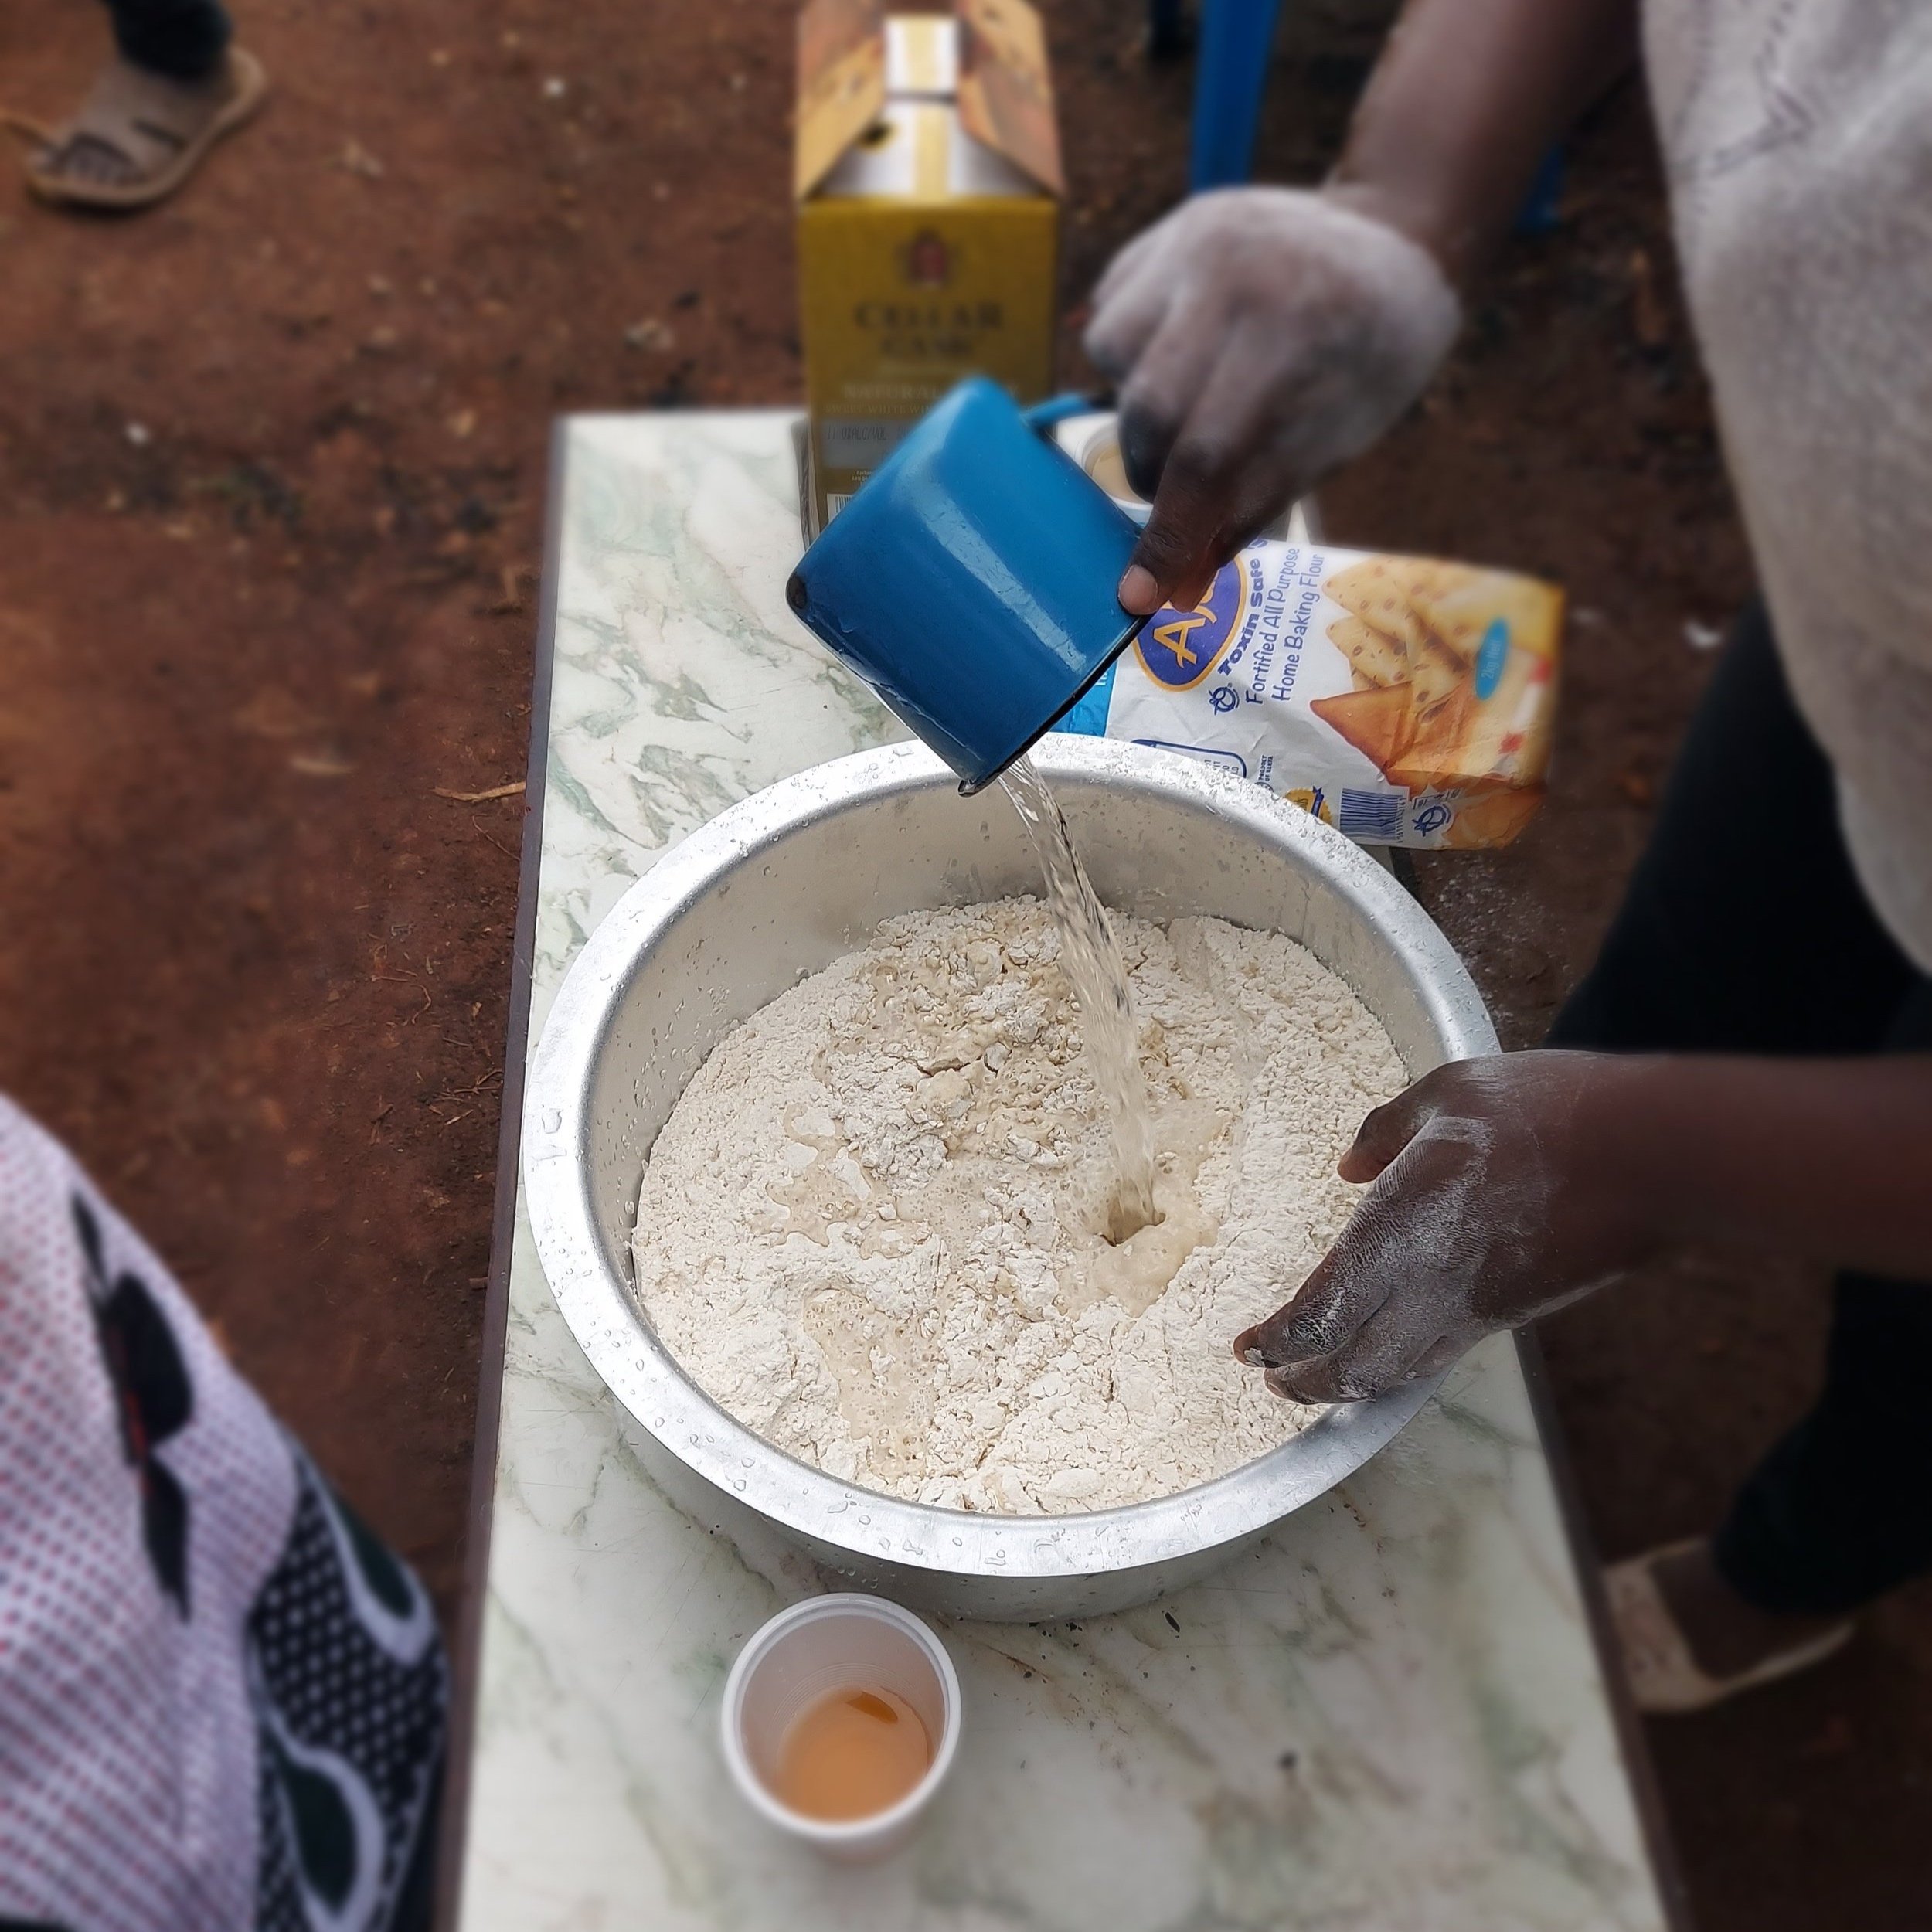 Prepping the chapati mixture of flour and water